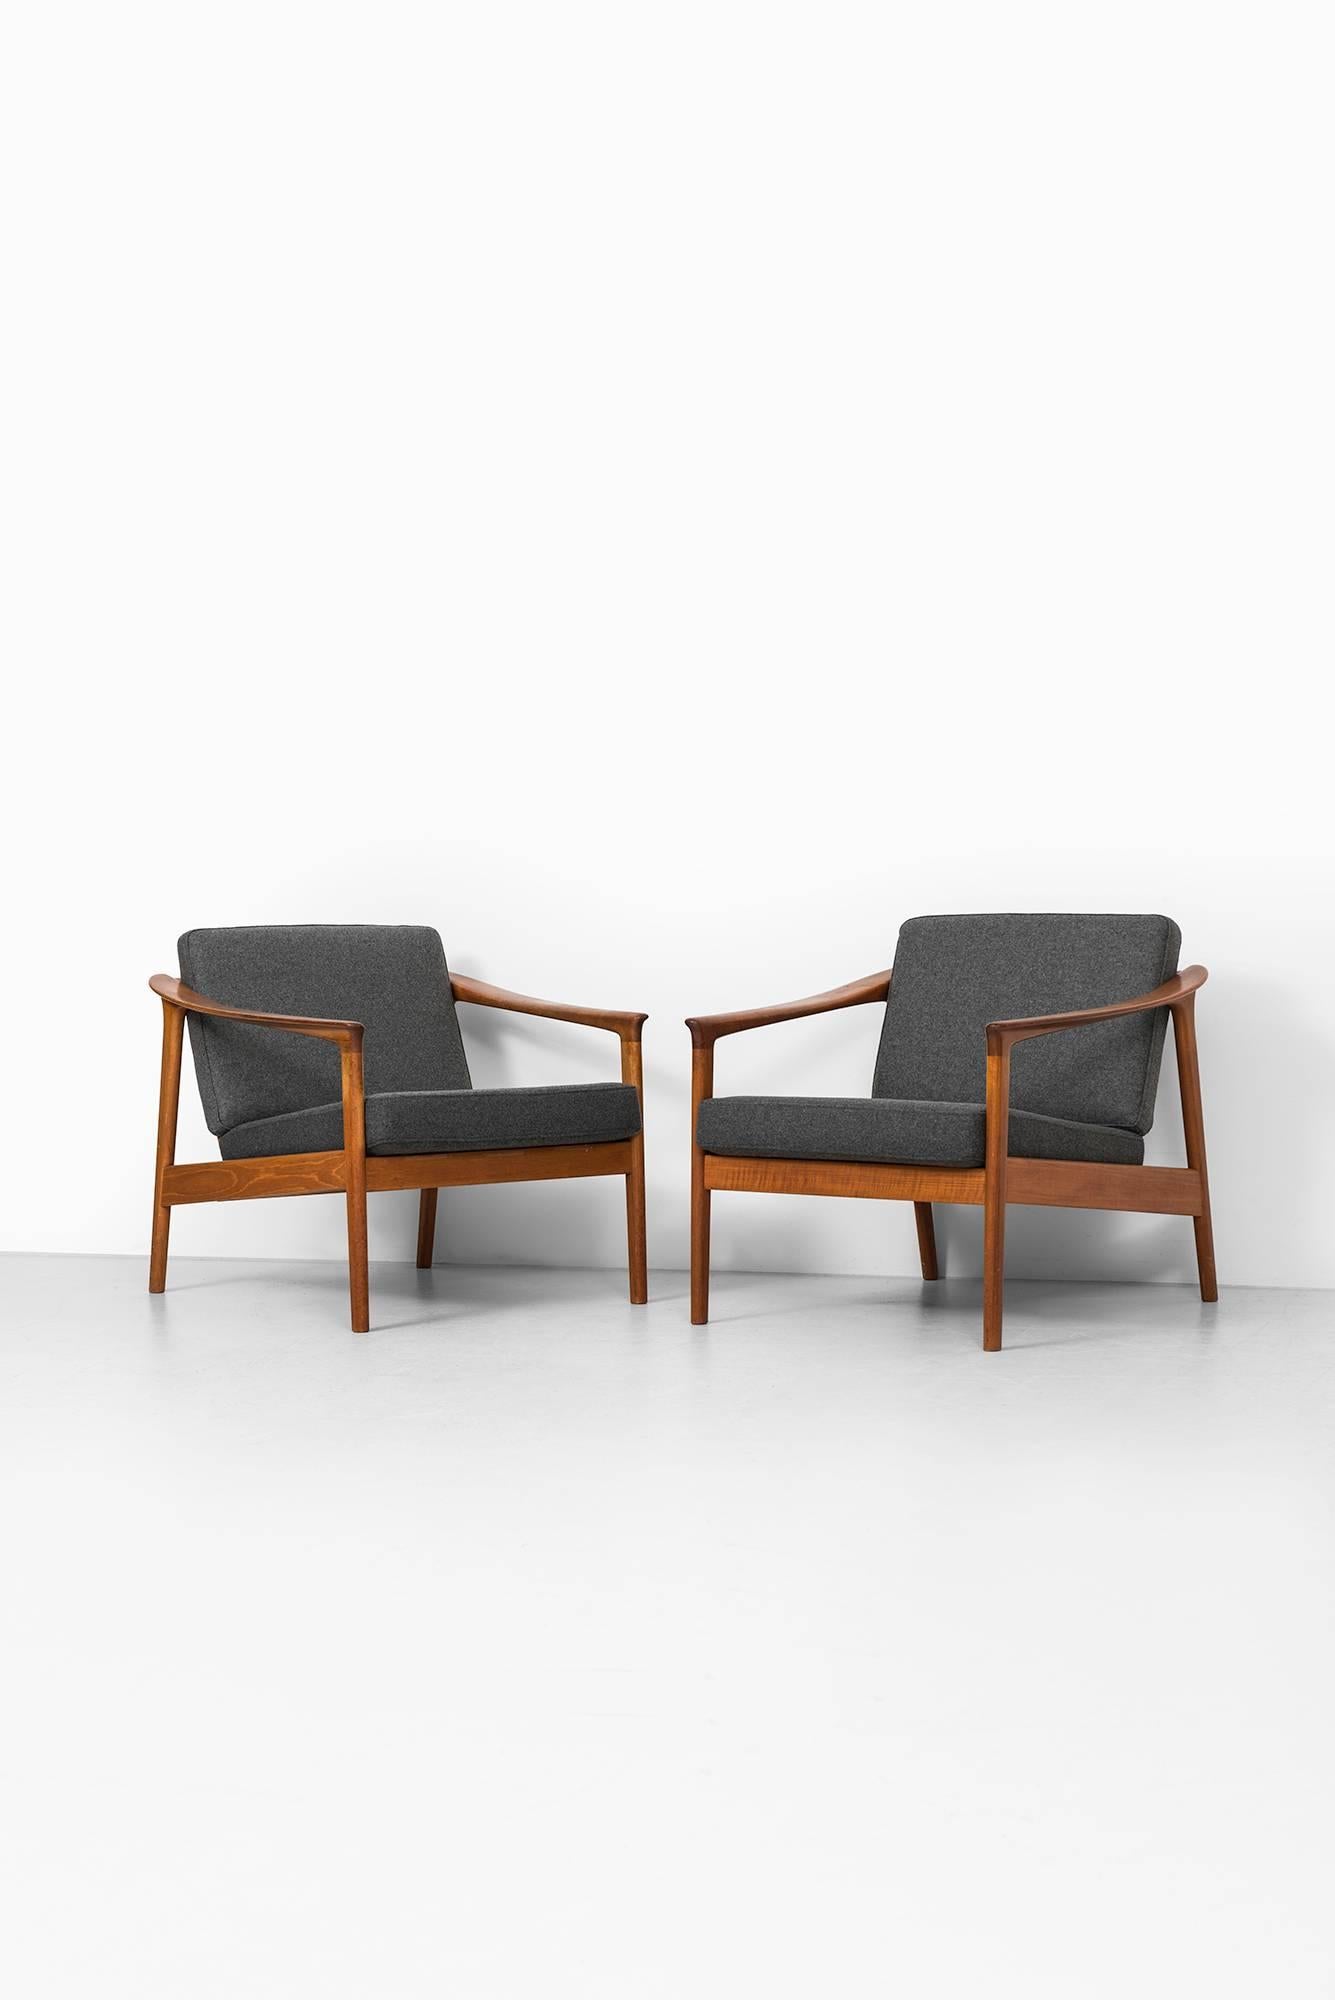 Pair of easy chairs model Colorado designed by Folke Ohlsson. Produced by Bodafors in Sweden. Matching sofa is also available. 